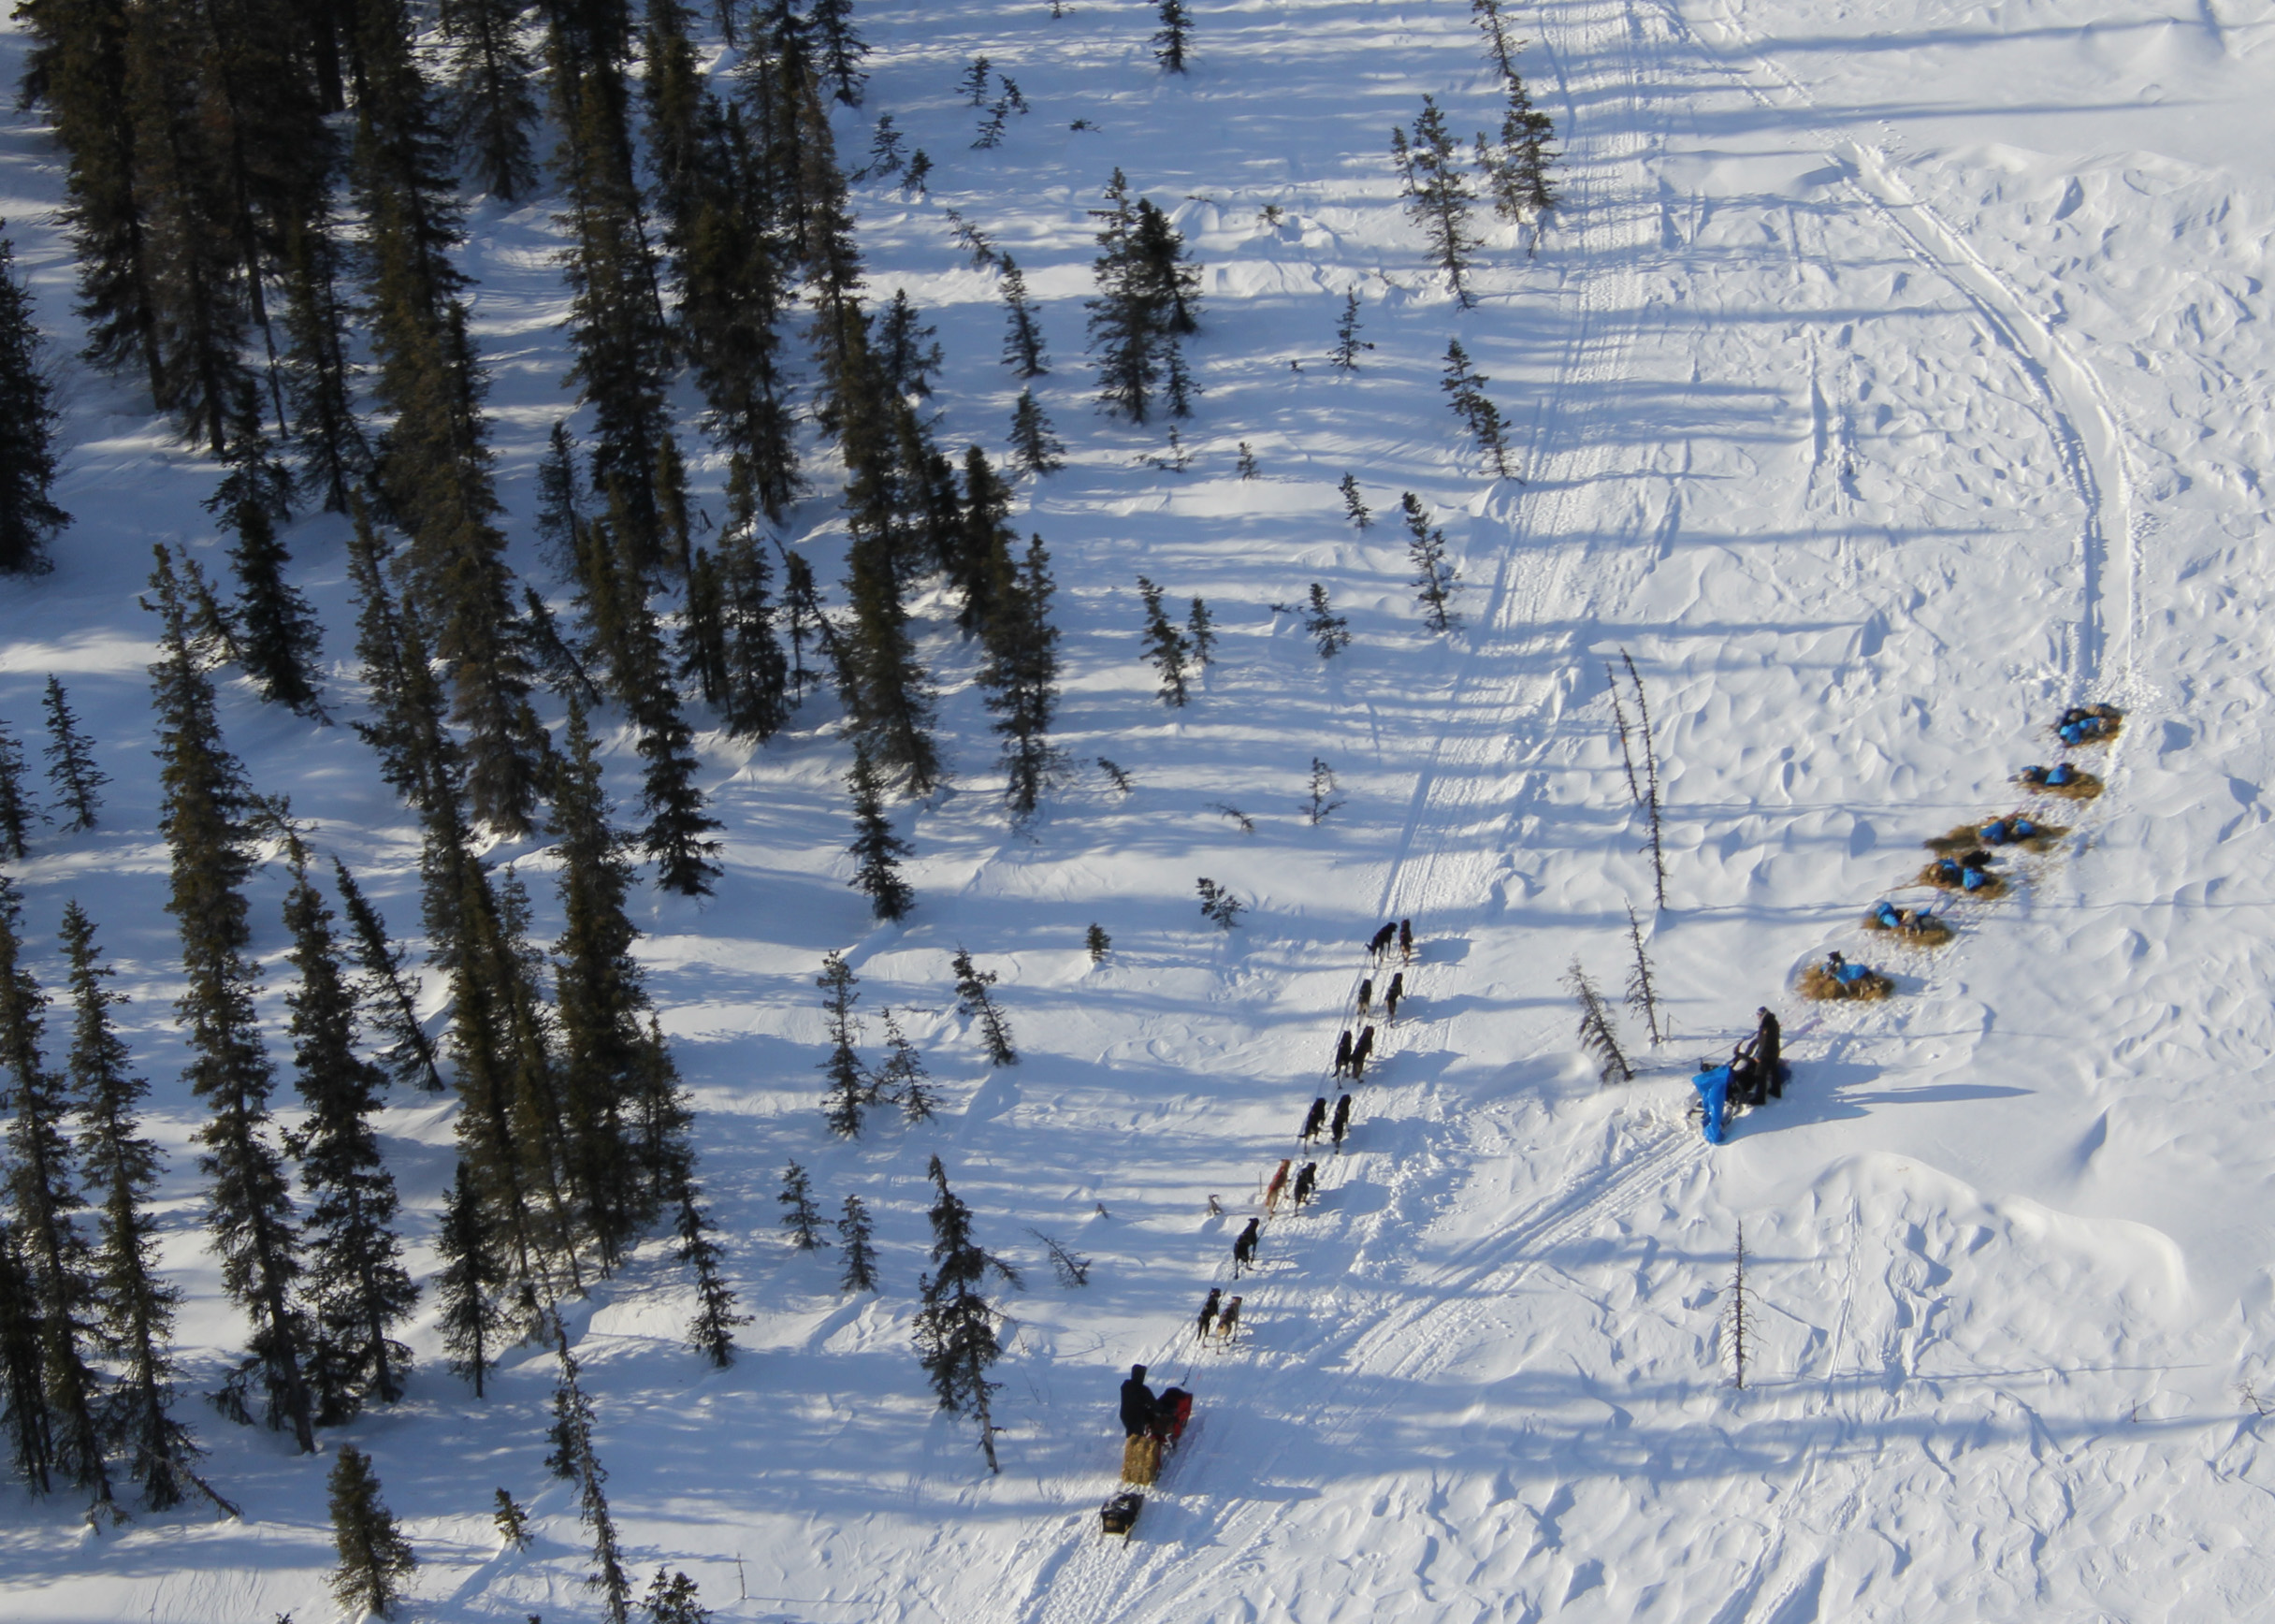 The Iditarod Route and History in Alaska